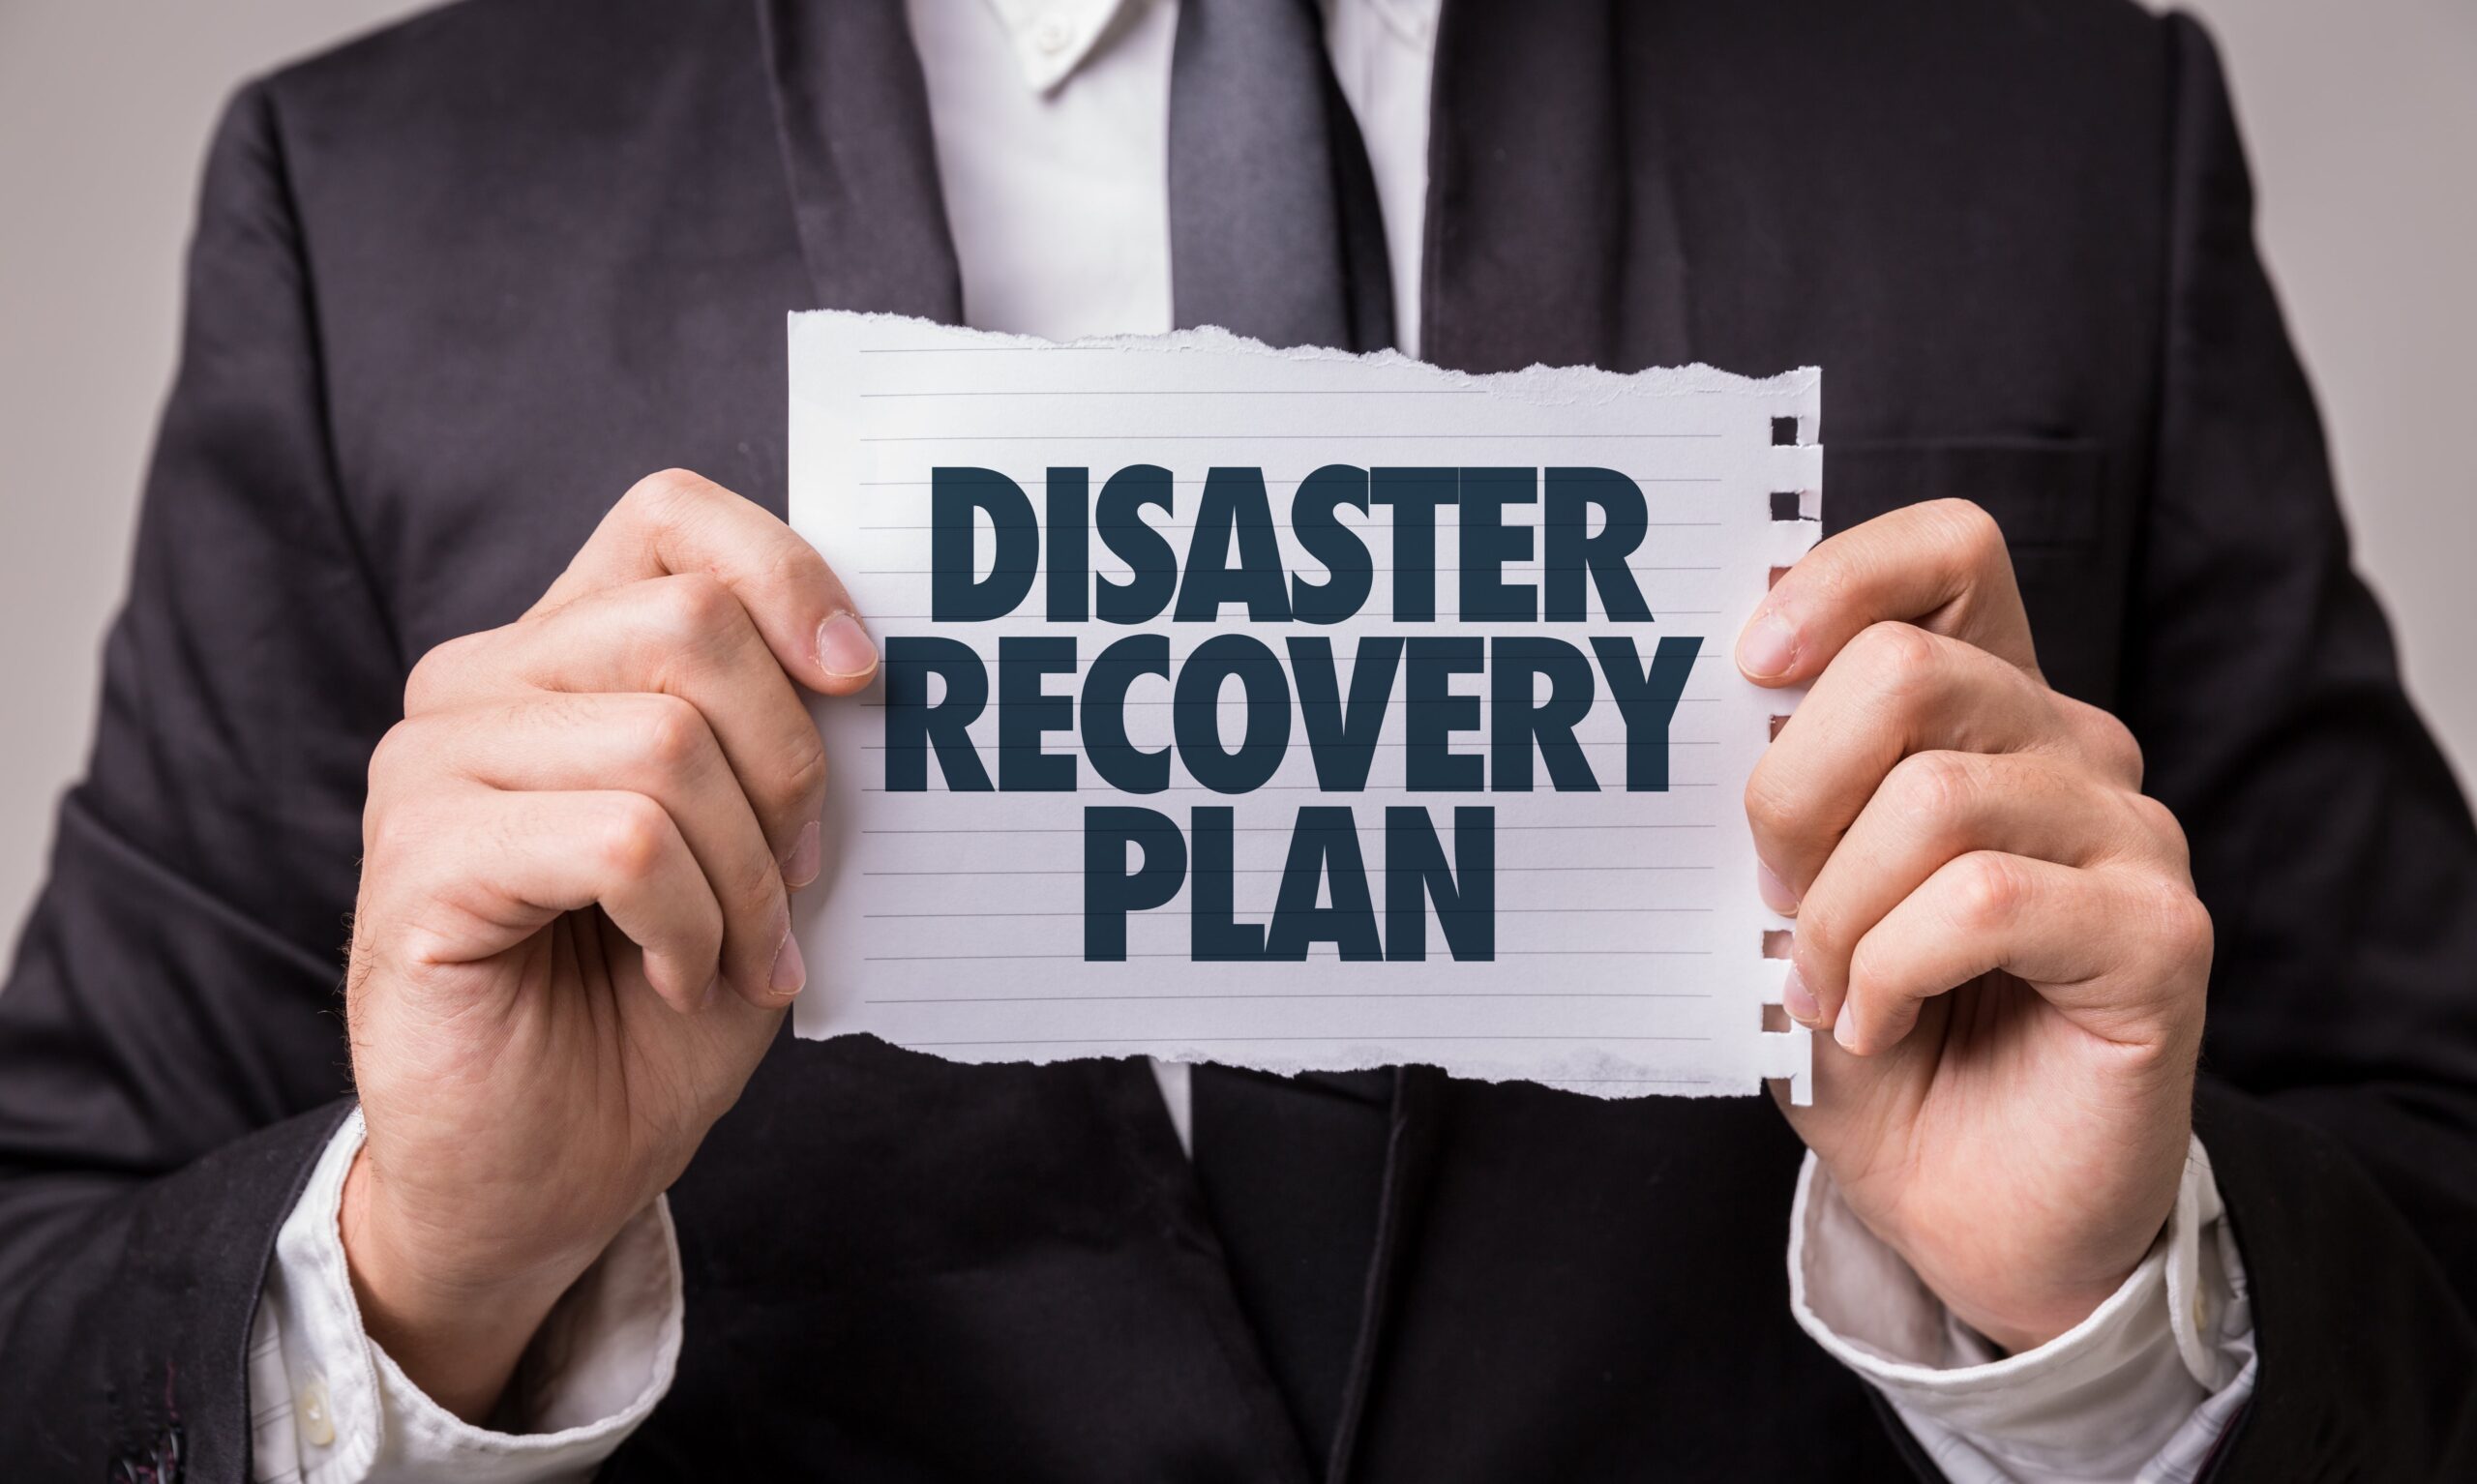 Do you have a Disaster Recovery plan?